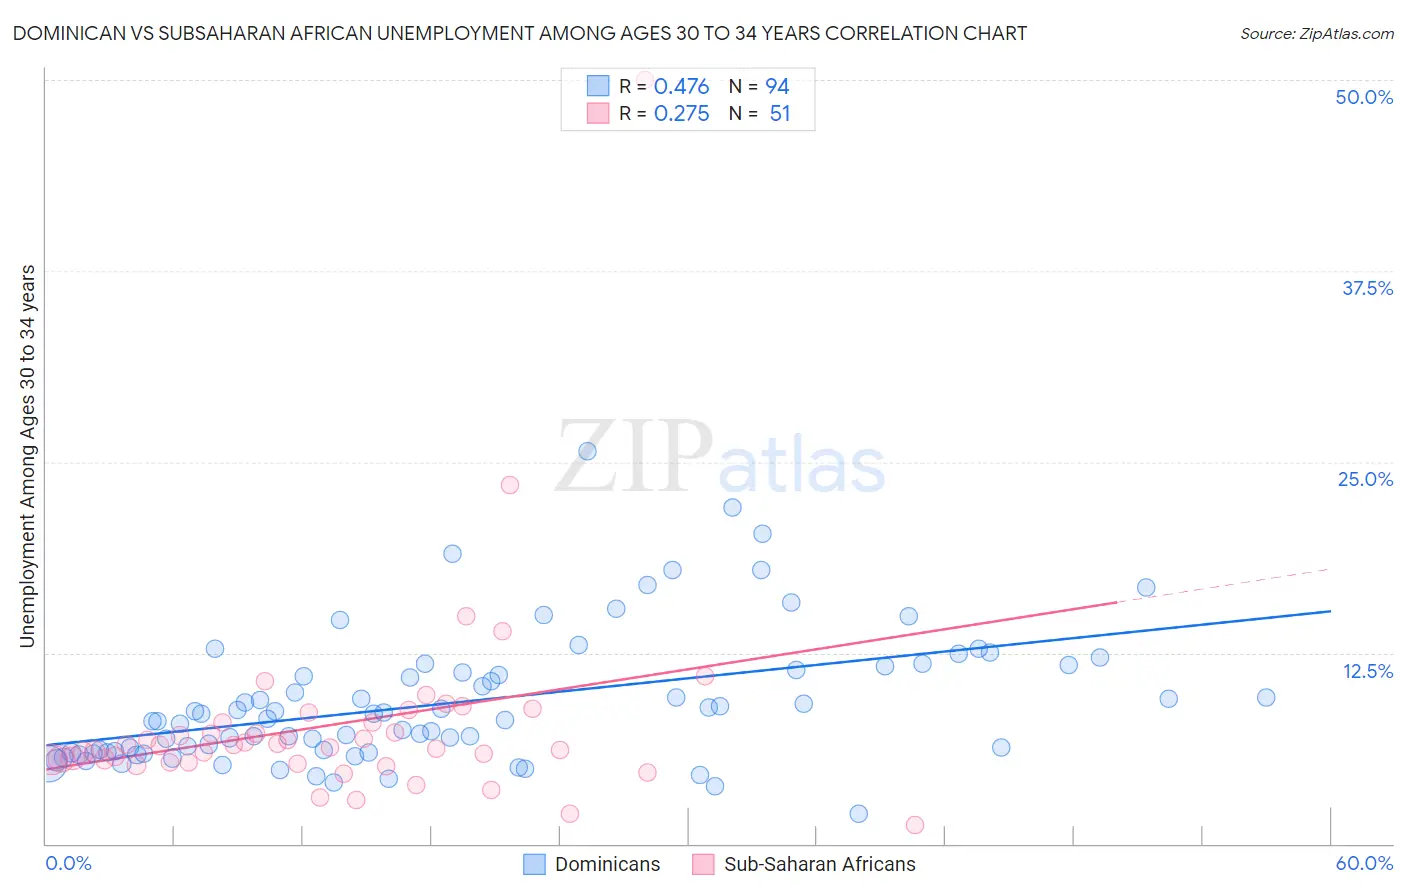 Dominican vs Subsaharan African Unemployment Among Ages 30 to 34 years